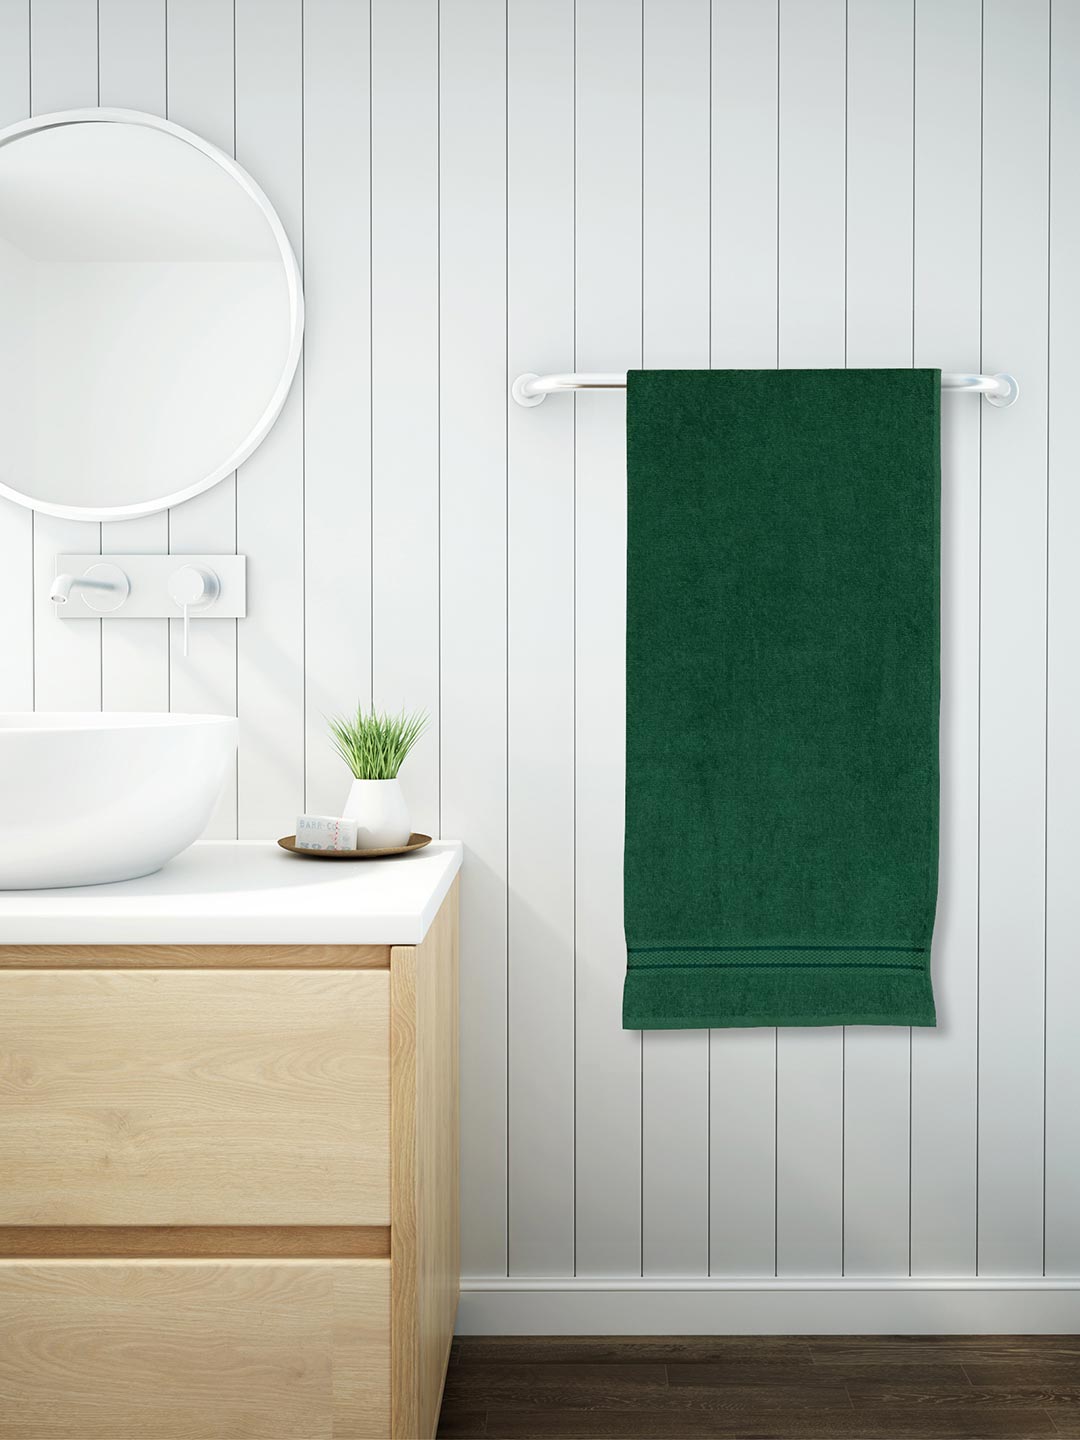 Spaces Day2Day 400 GSM Solid Large Bath Towel (Green)